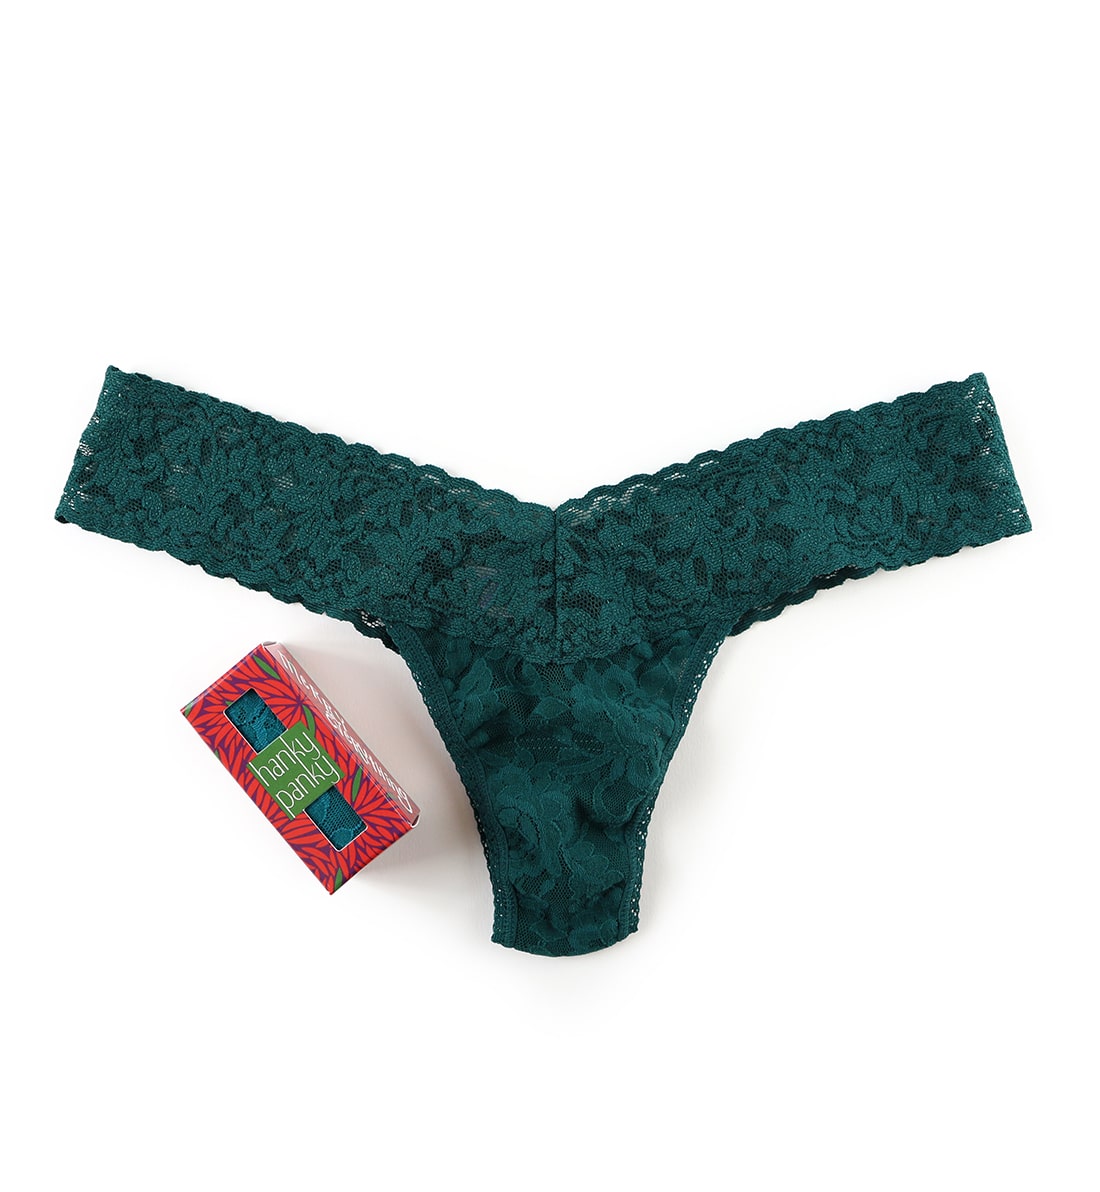 Hanky Panky Occasions Low Rise Thong (4911P),Merry Everything - Merry Everything,One Size